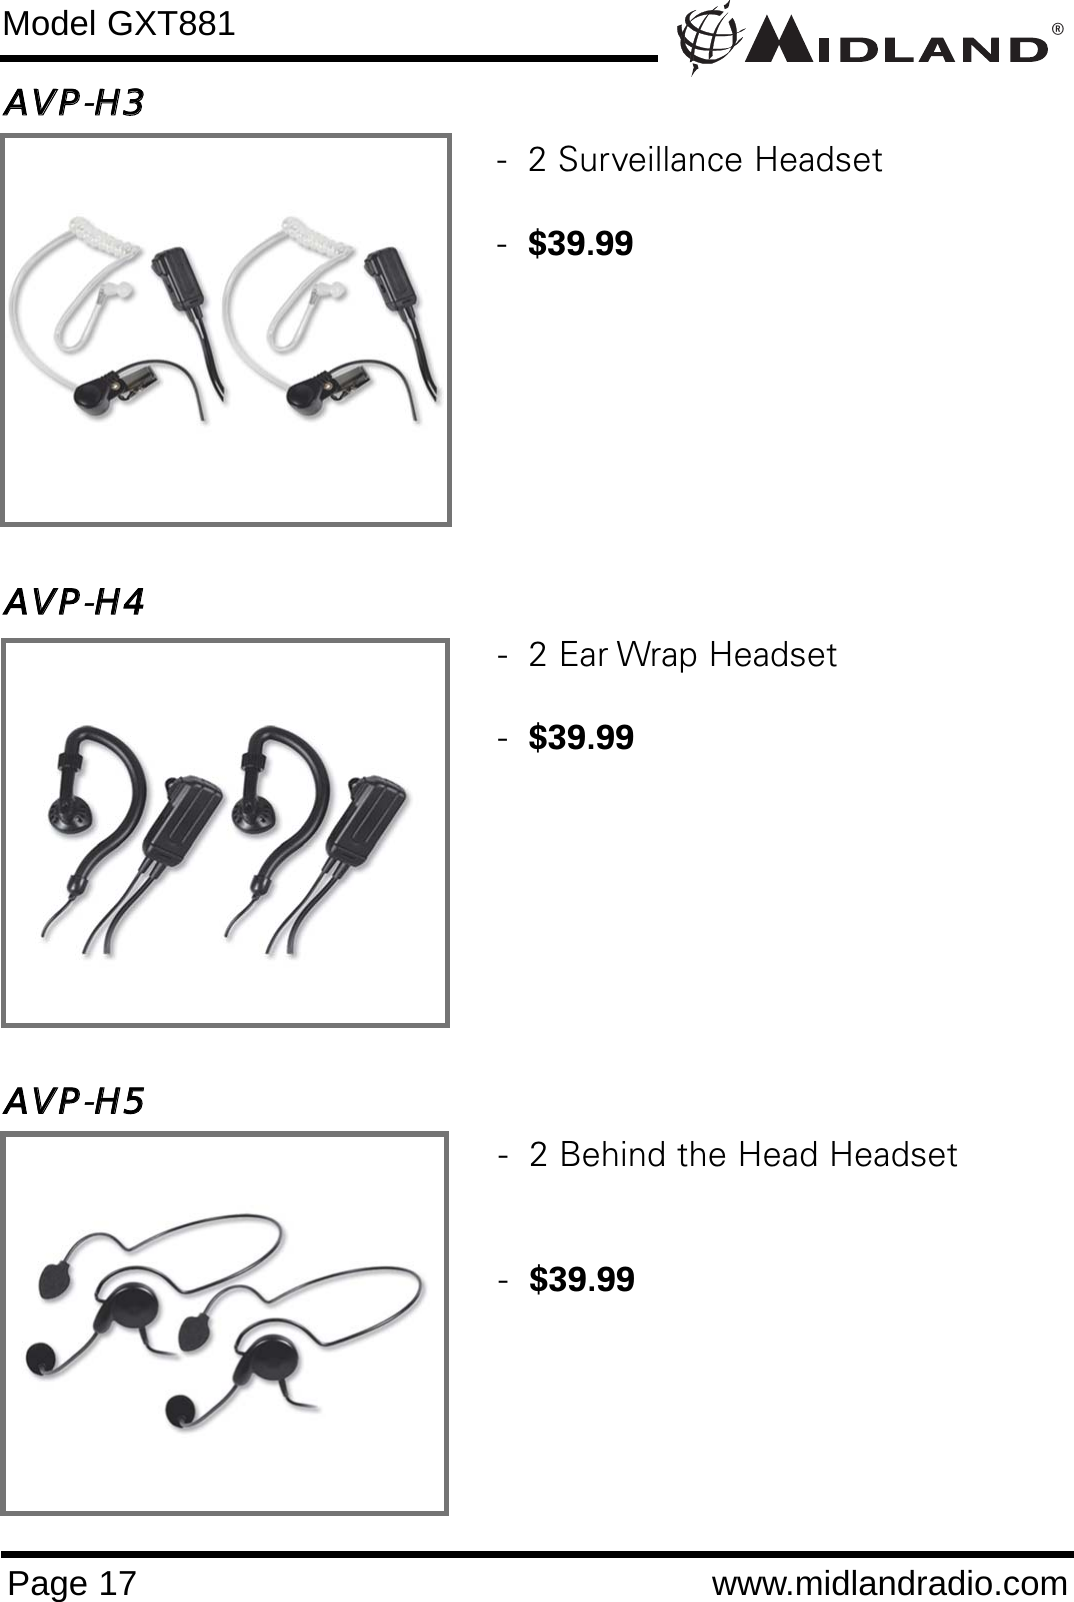 ®Page 17 www.midlandradio.comModel GXT881AAVVPP-HH33AAVVPP-HH44AAVVPP-HH55-  2 Behind the Head Headset -  $39.99-  2 Ear Wrap Headset-  $39.99-  2 Surveillance Headset-  $39.99